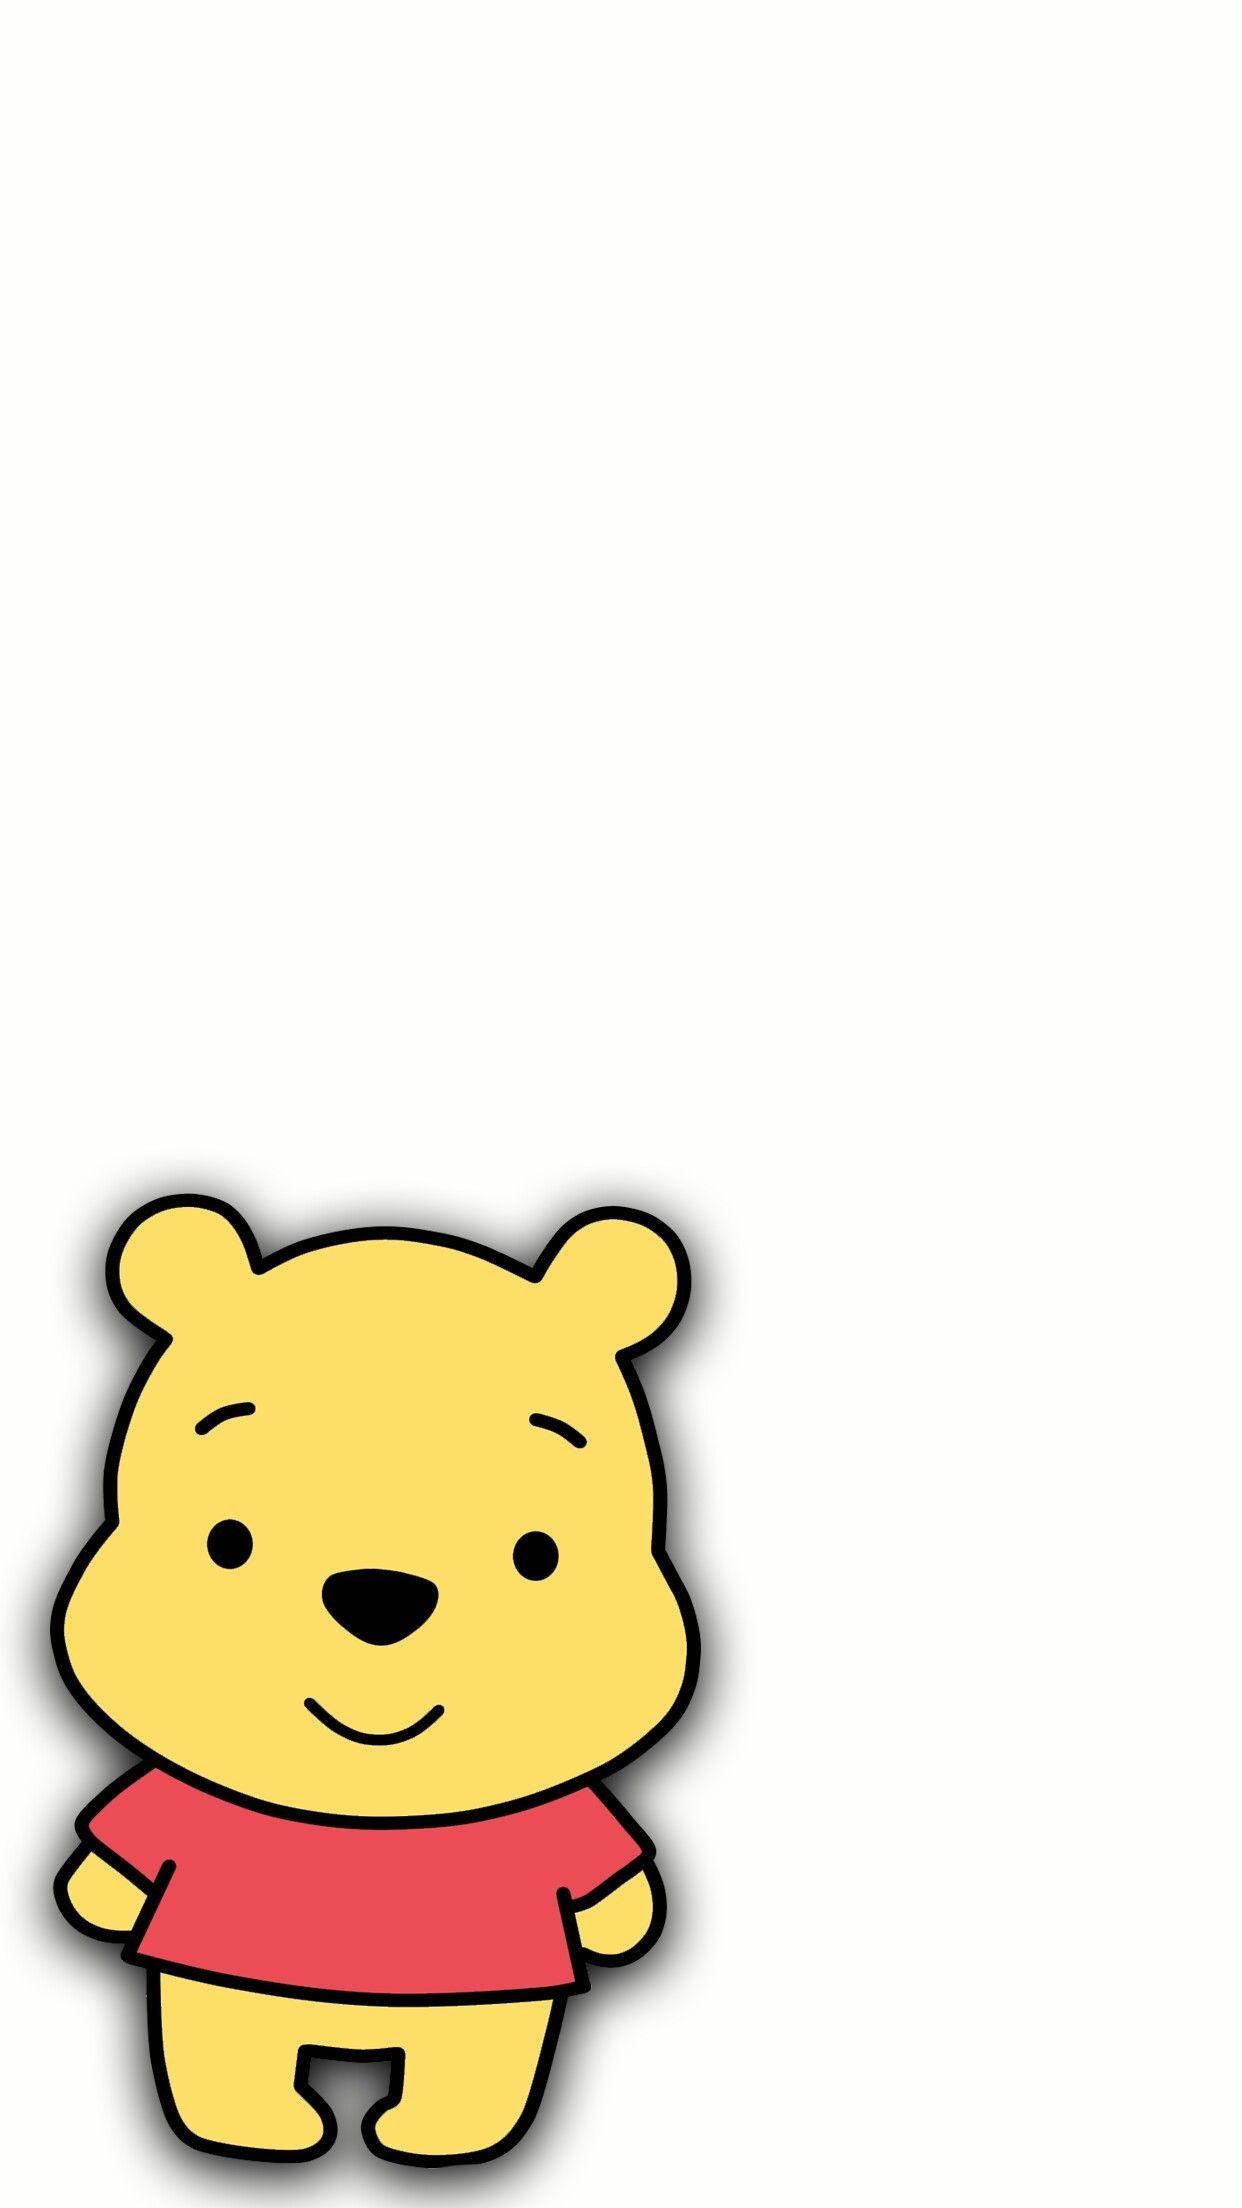 Winnie The Pooh Aesthetic Wallpaper  escapeauthoritycom